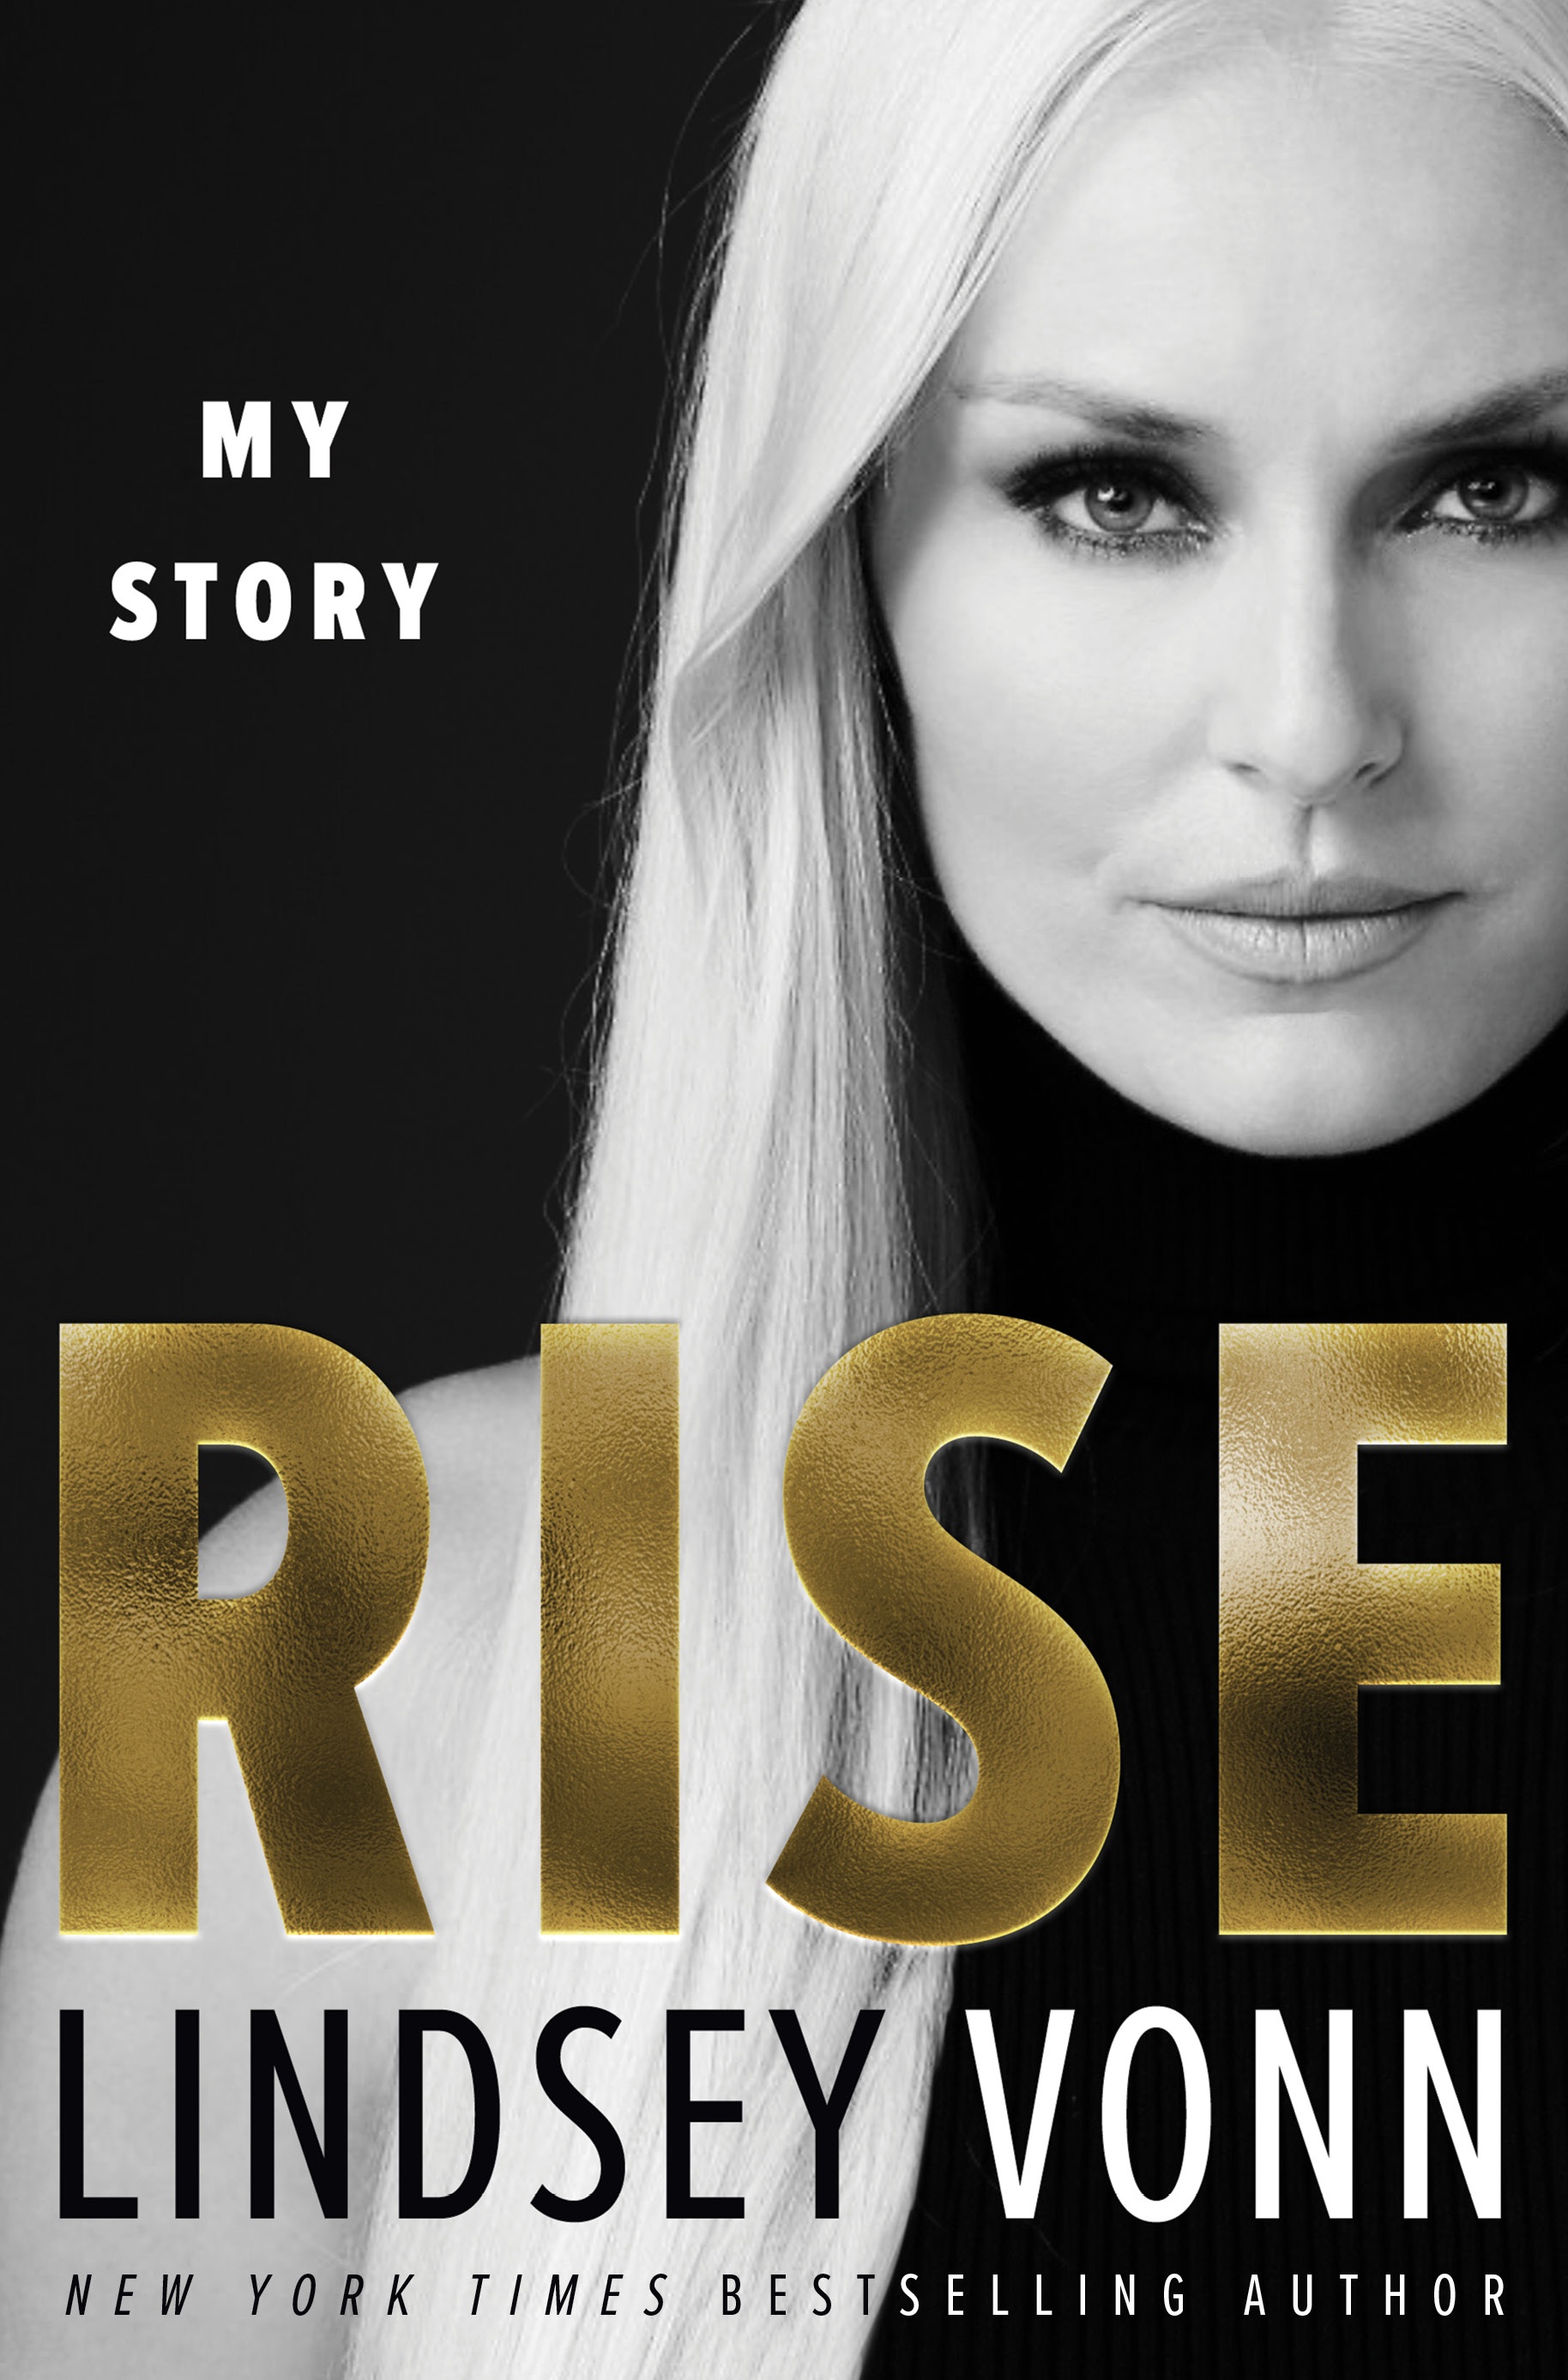 Virtual event with Lindsey Vonn/Rise